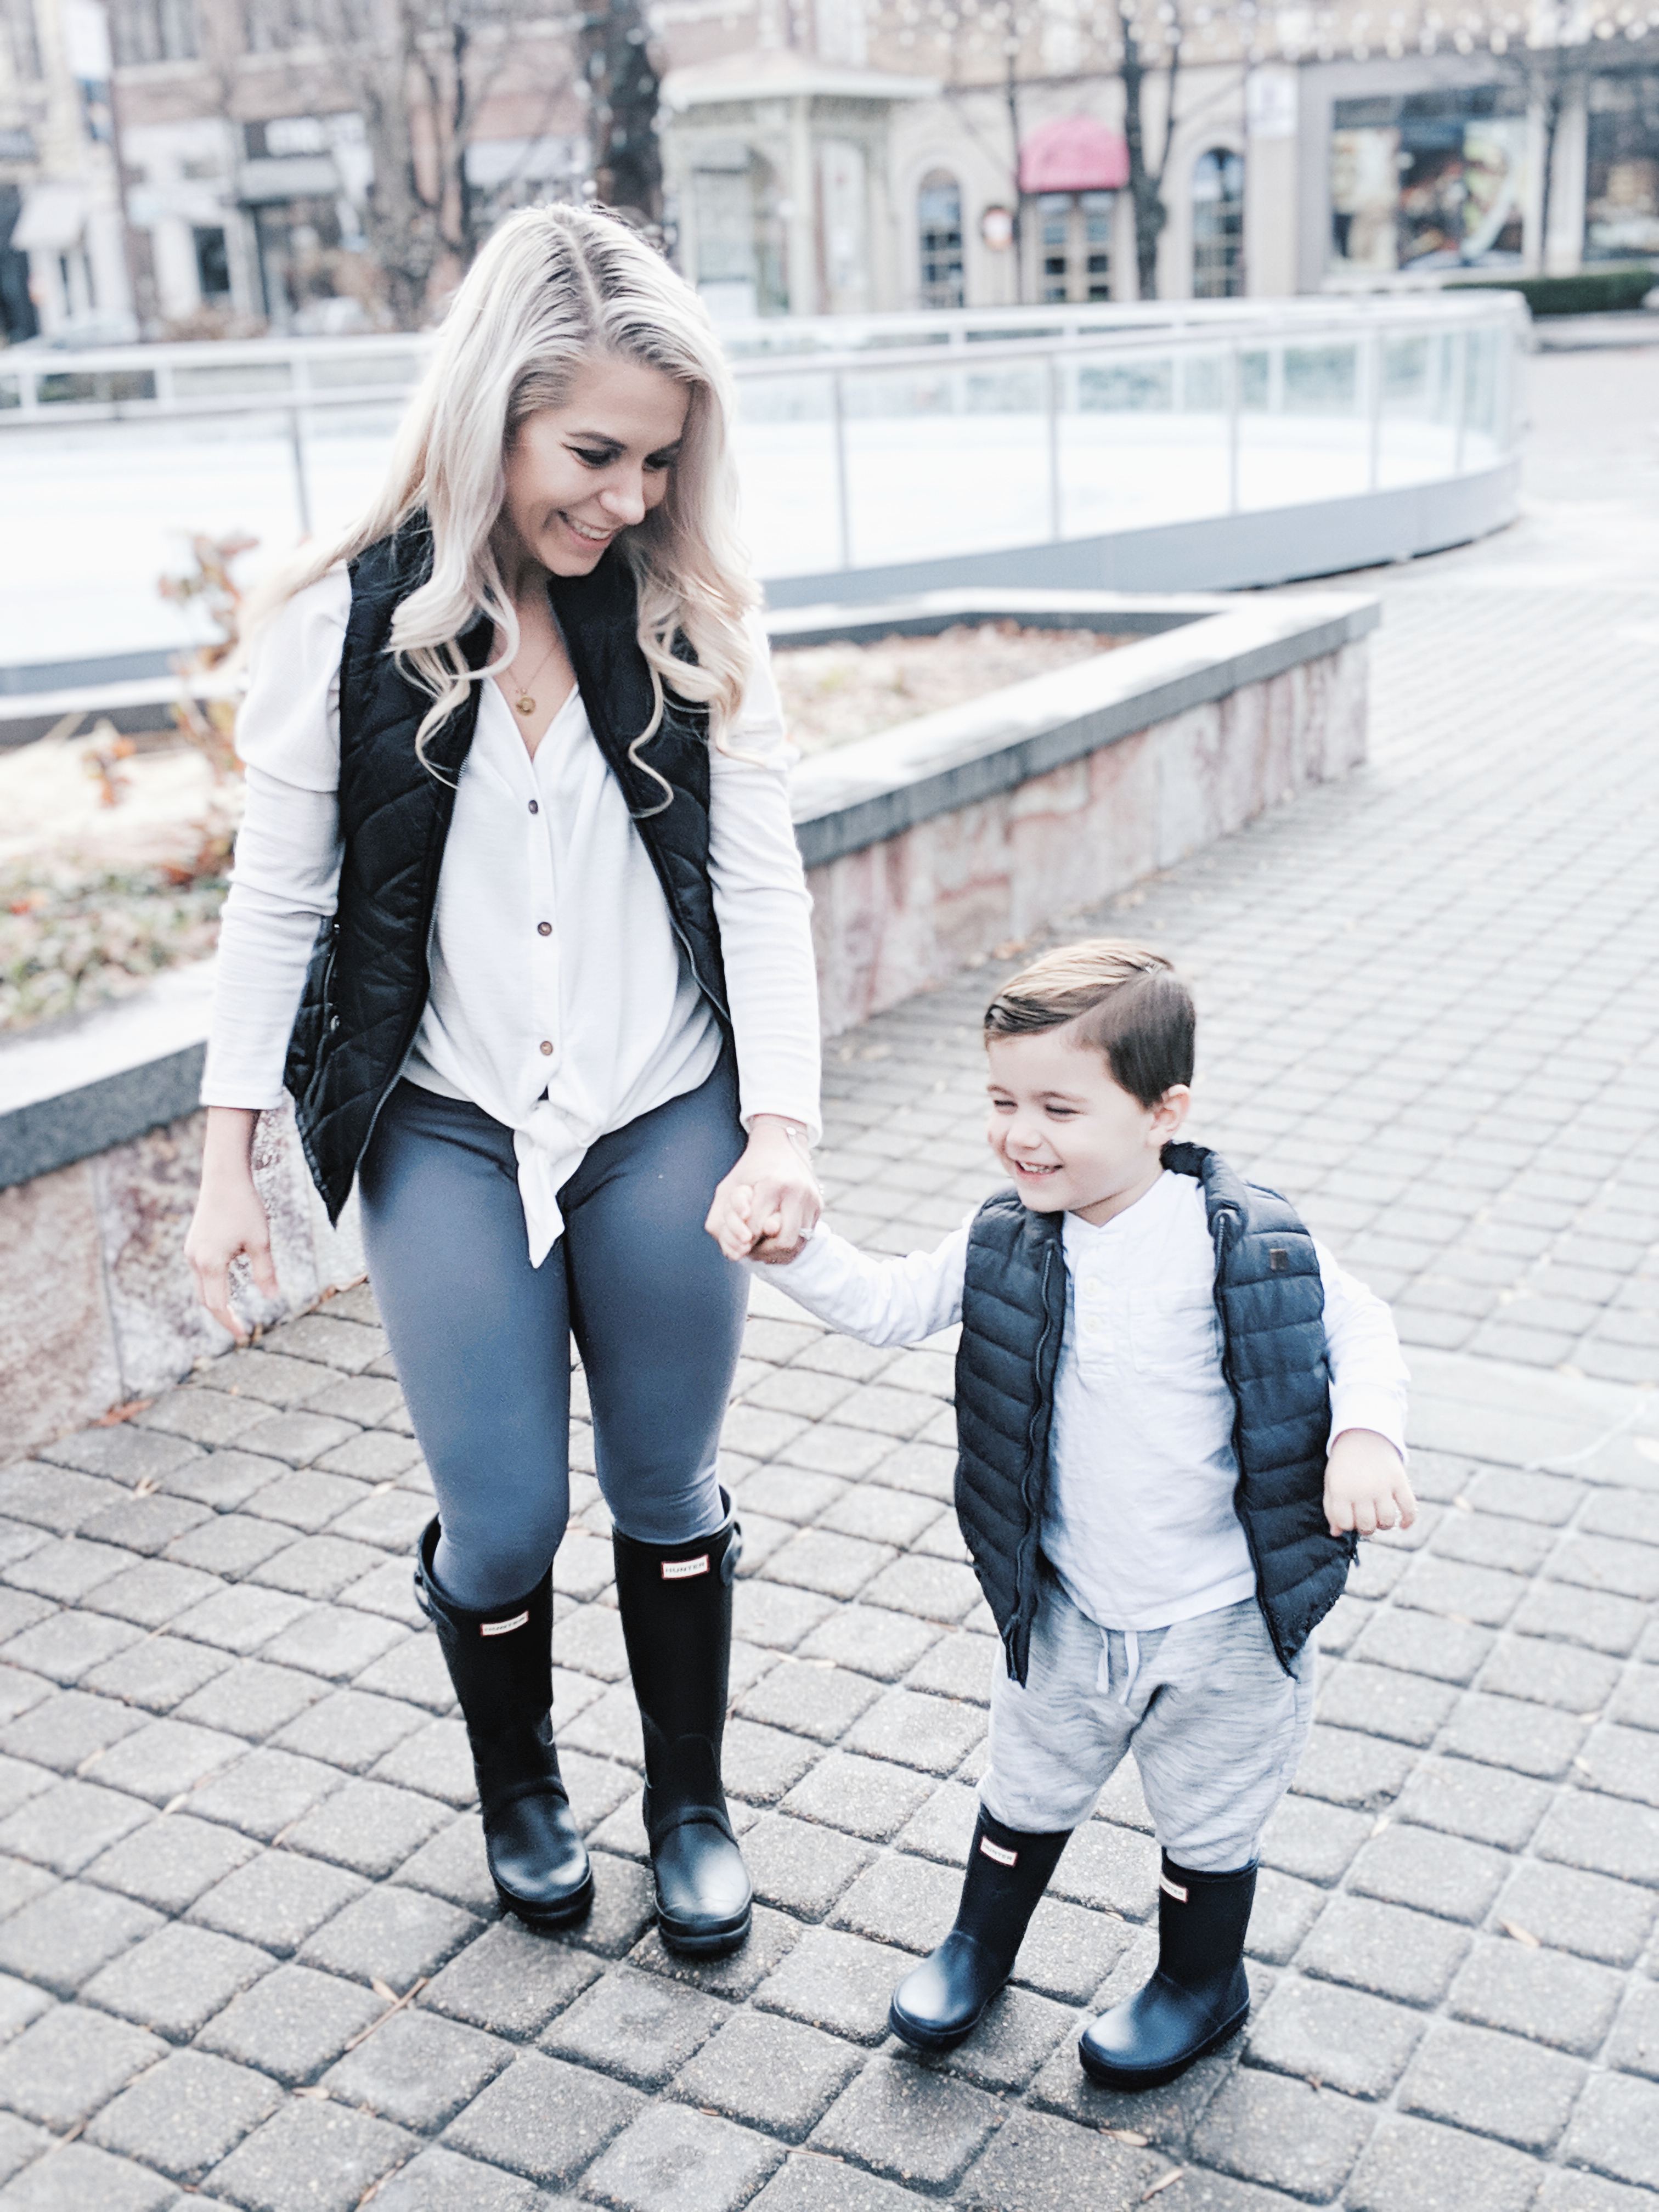 Mommy and Me Outfits - Winter Style: Fashion blogger Tricia Nibarger of COVET by tricia showcases twinning looks for the winter! Find the cutest mommy and me fashion for boy moms or girl moms with these matching puffer vests, henleys, and Hunter boots. Casual winter style for moms. #MommyandMe #MomLife #Twinning